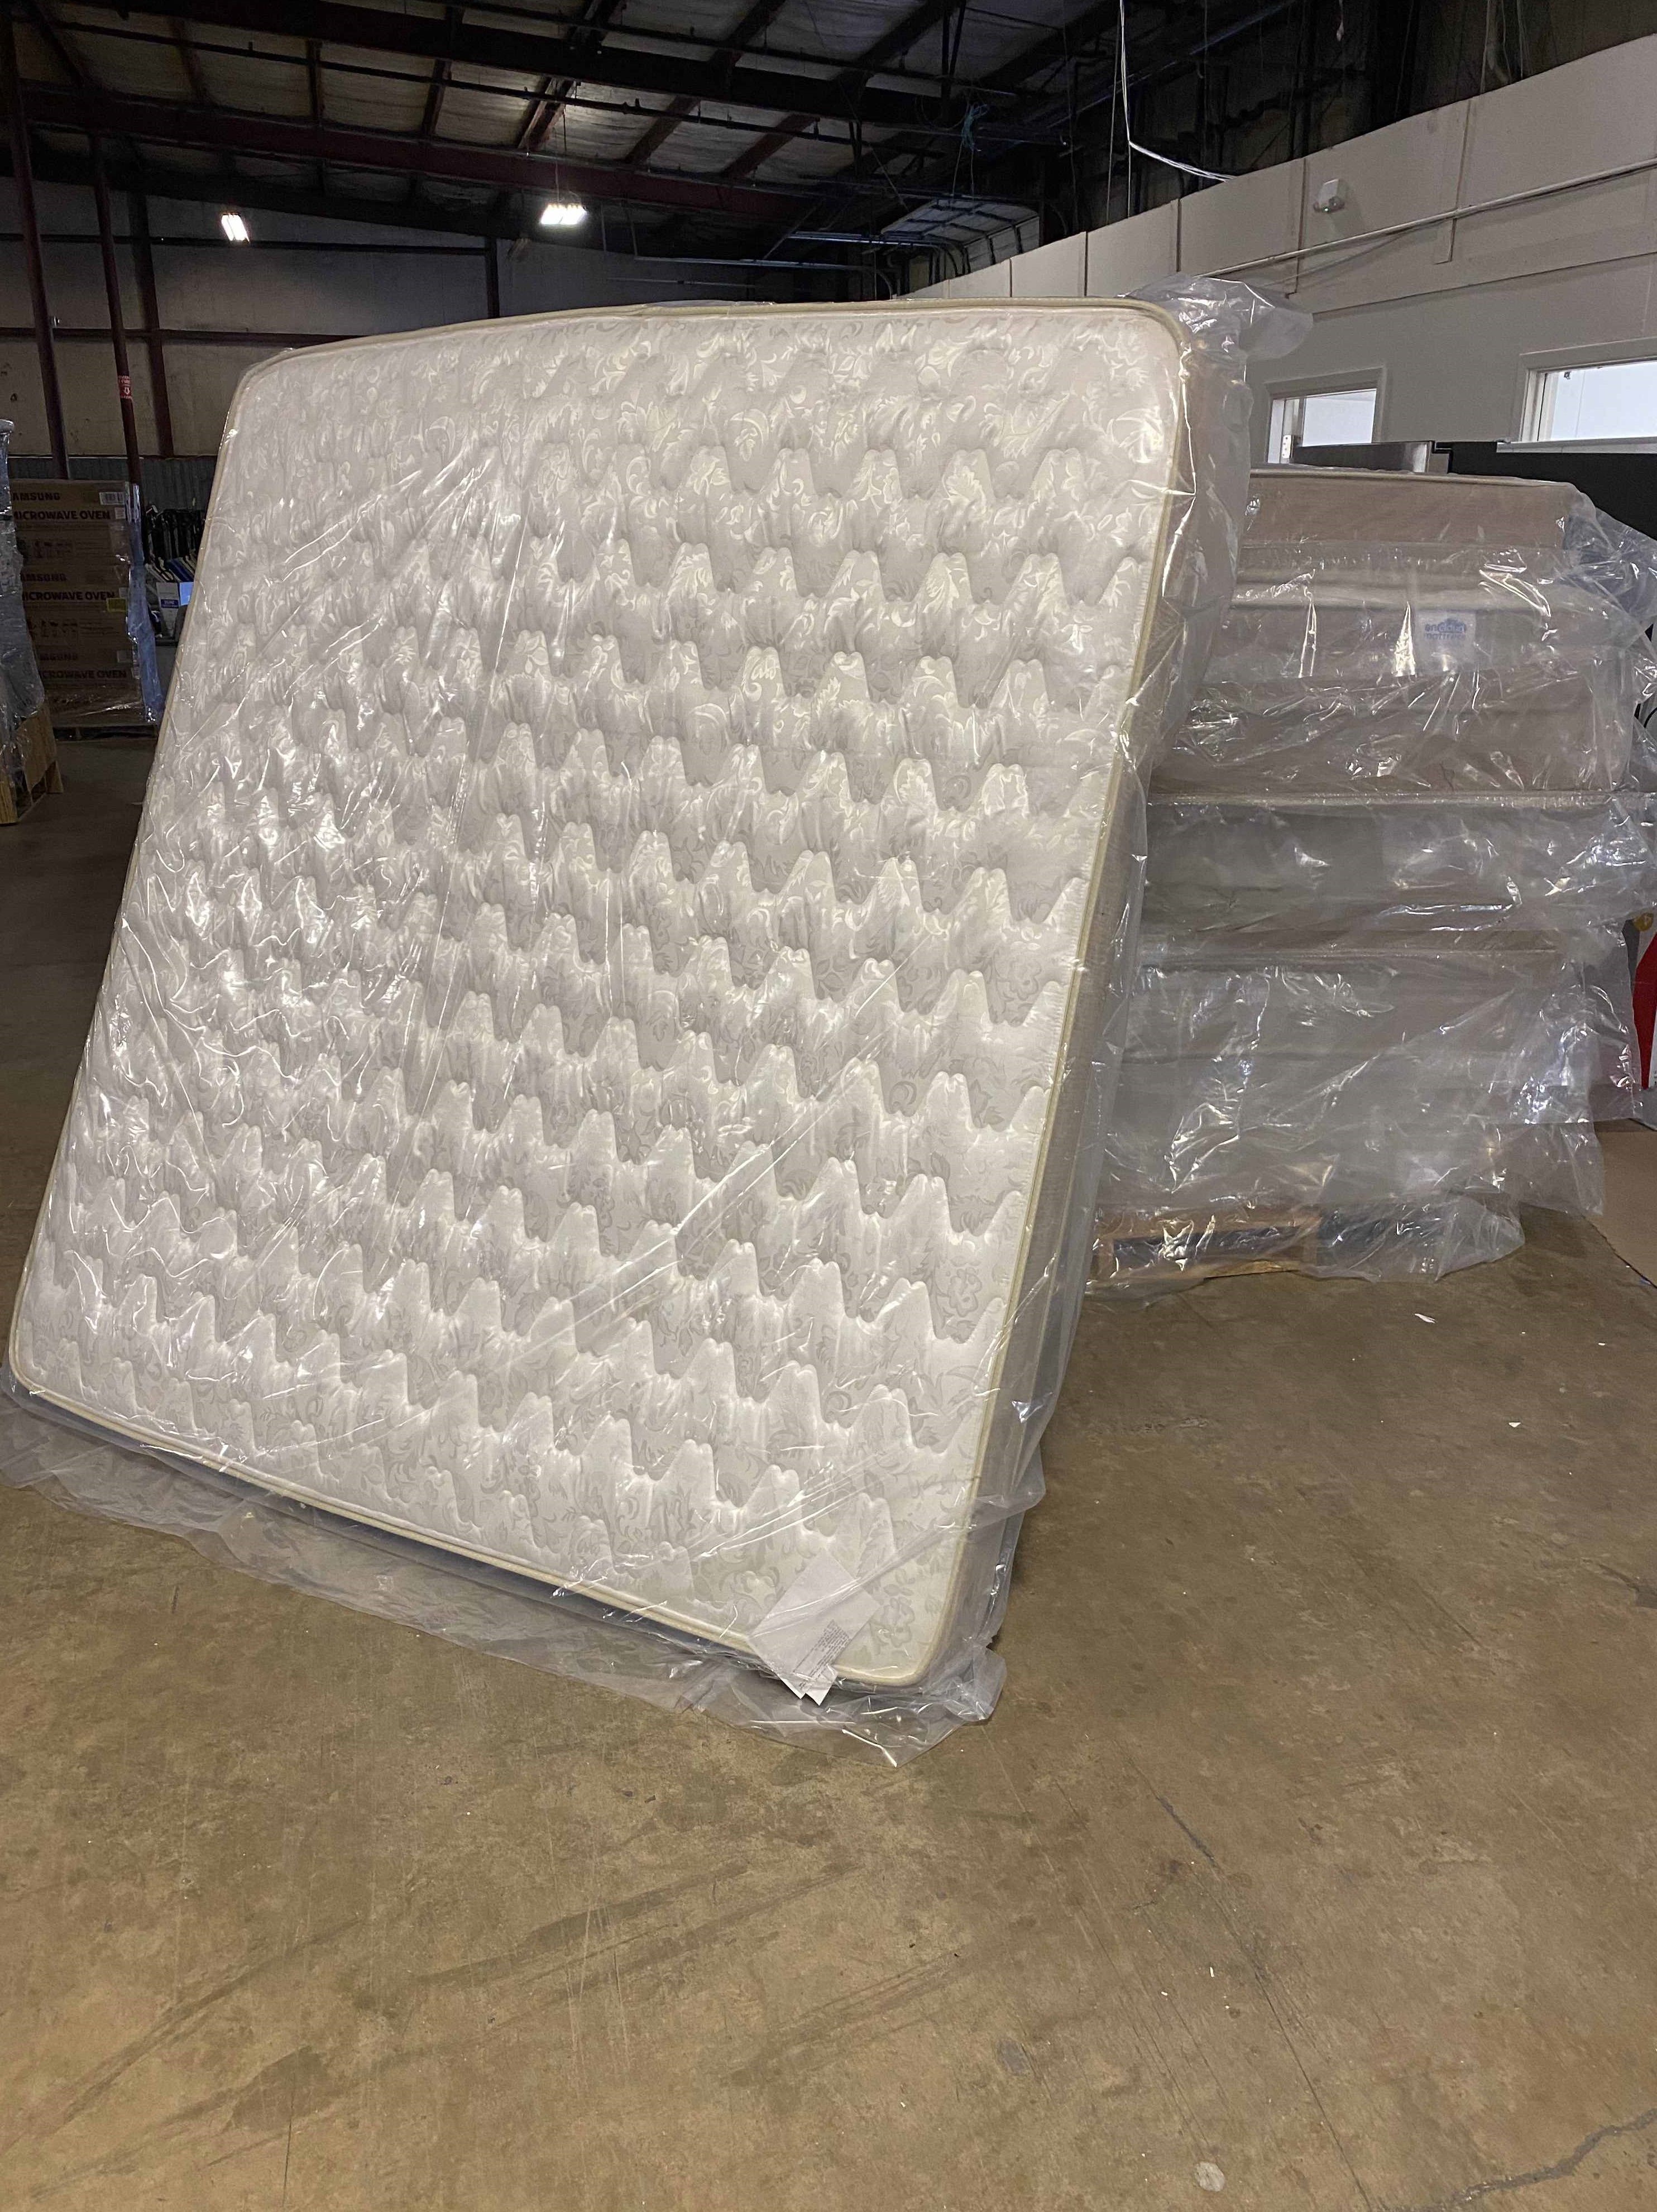 Queen and king brand new mattress ! Made in USA ! Must sell! Liquidation event R 6J